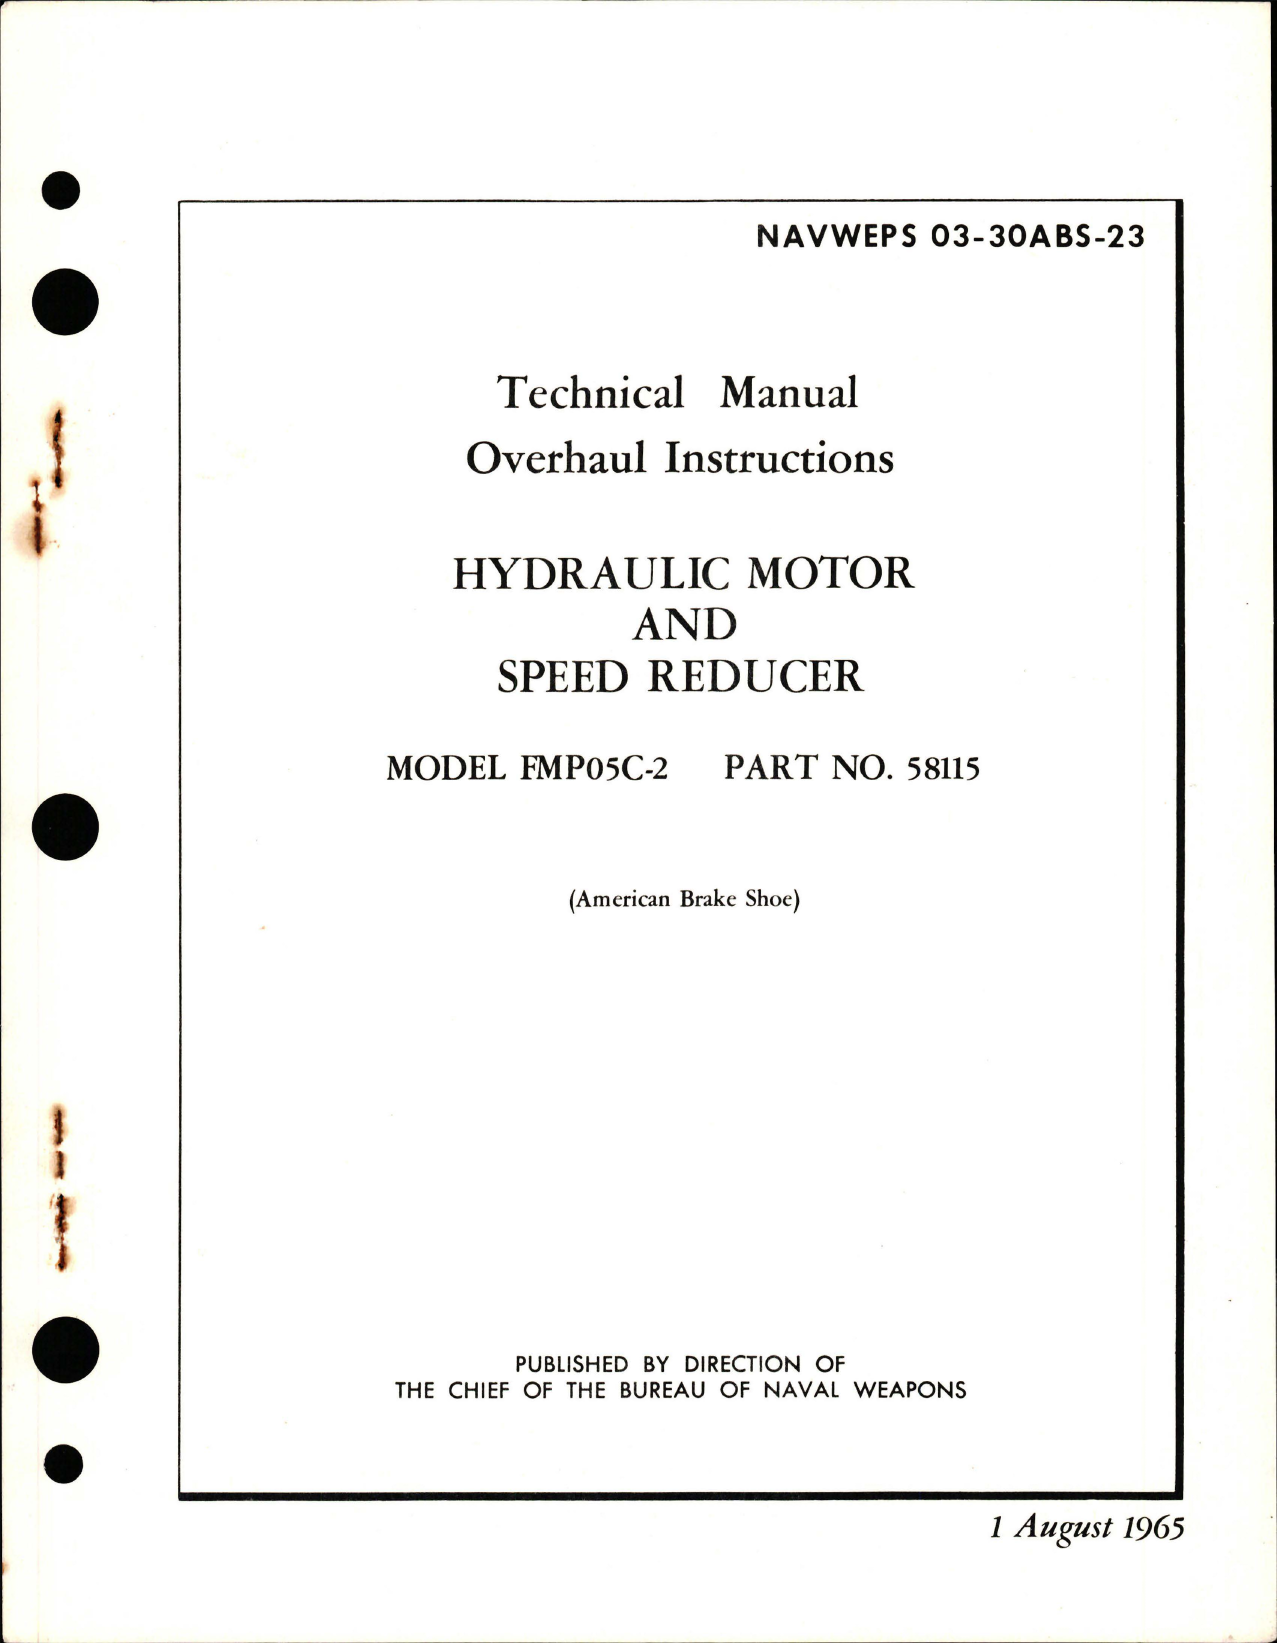 Sample page 1 from AirCorps Library document: Overhaul Instructions for Hydraulic Motor and Speed Reducer - Model FMP05C-2, Part 58115 